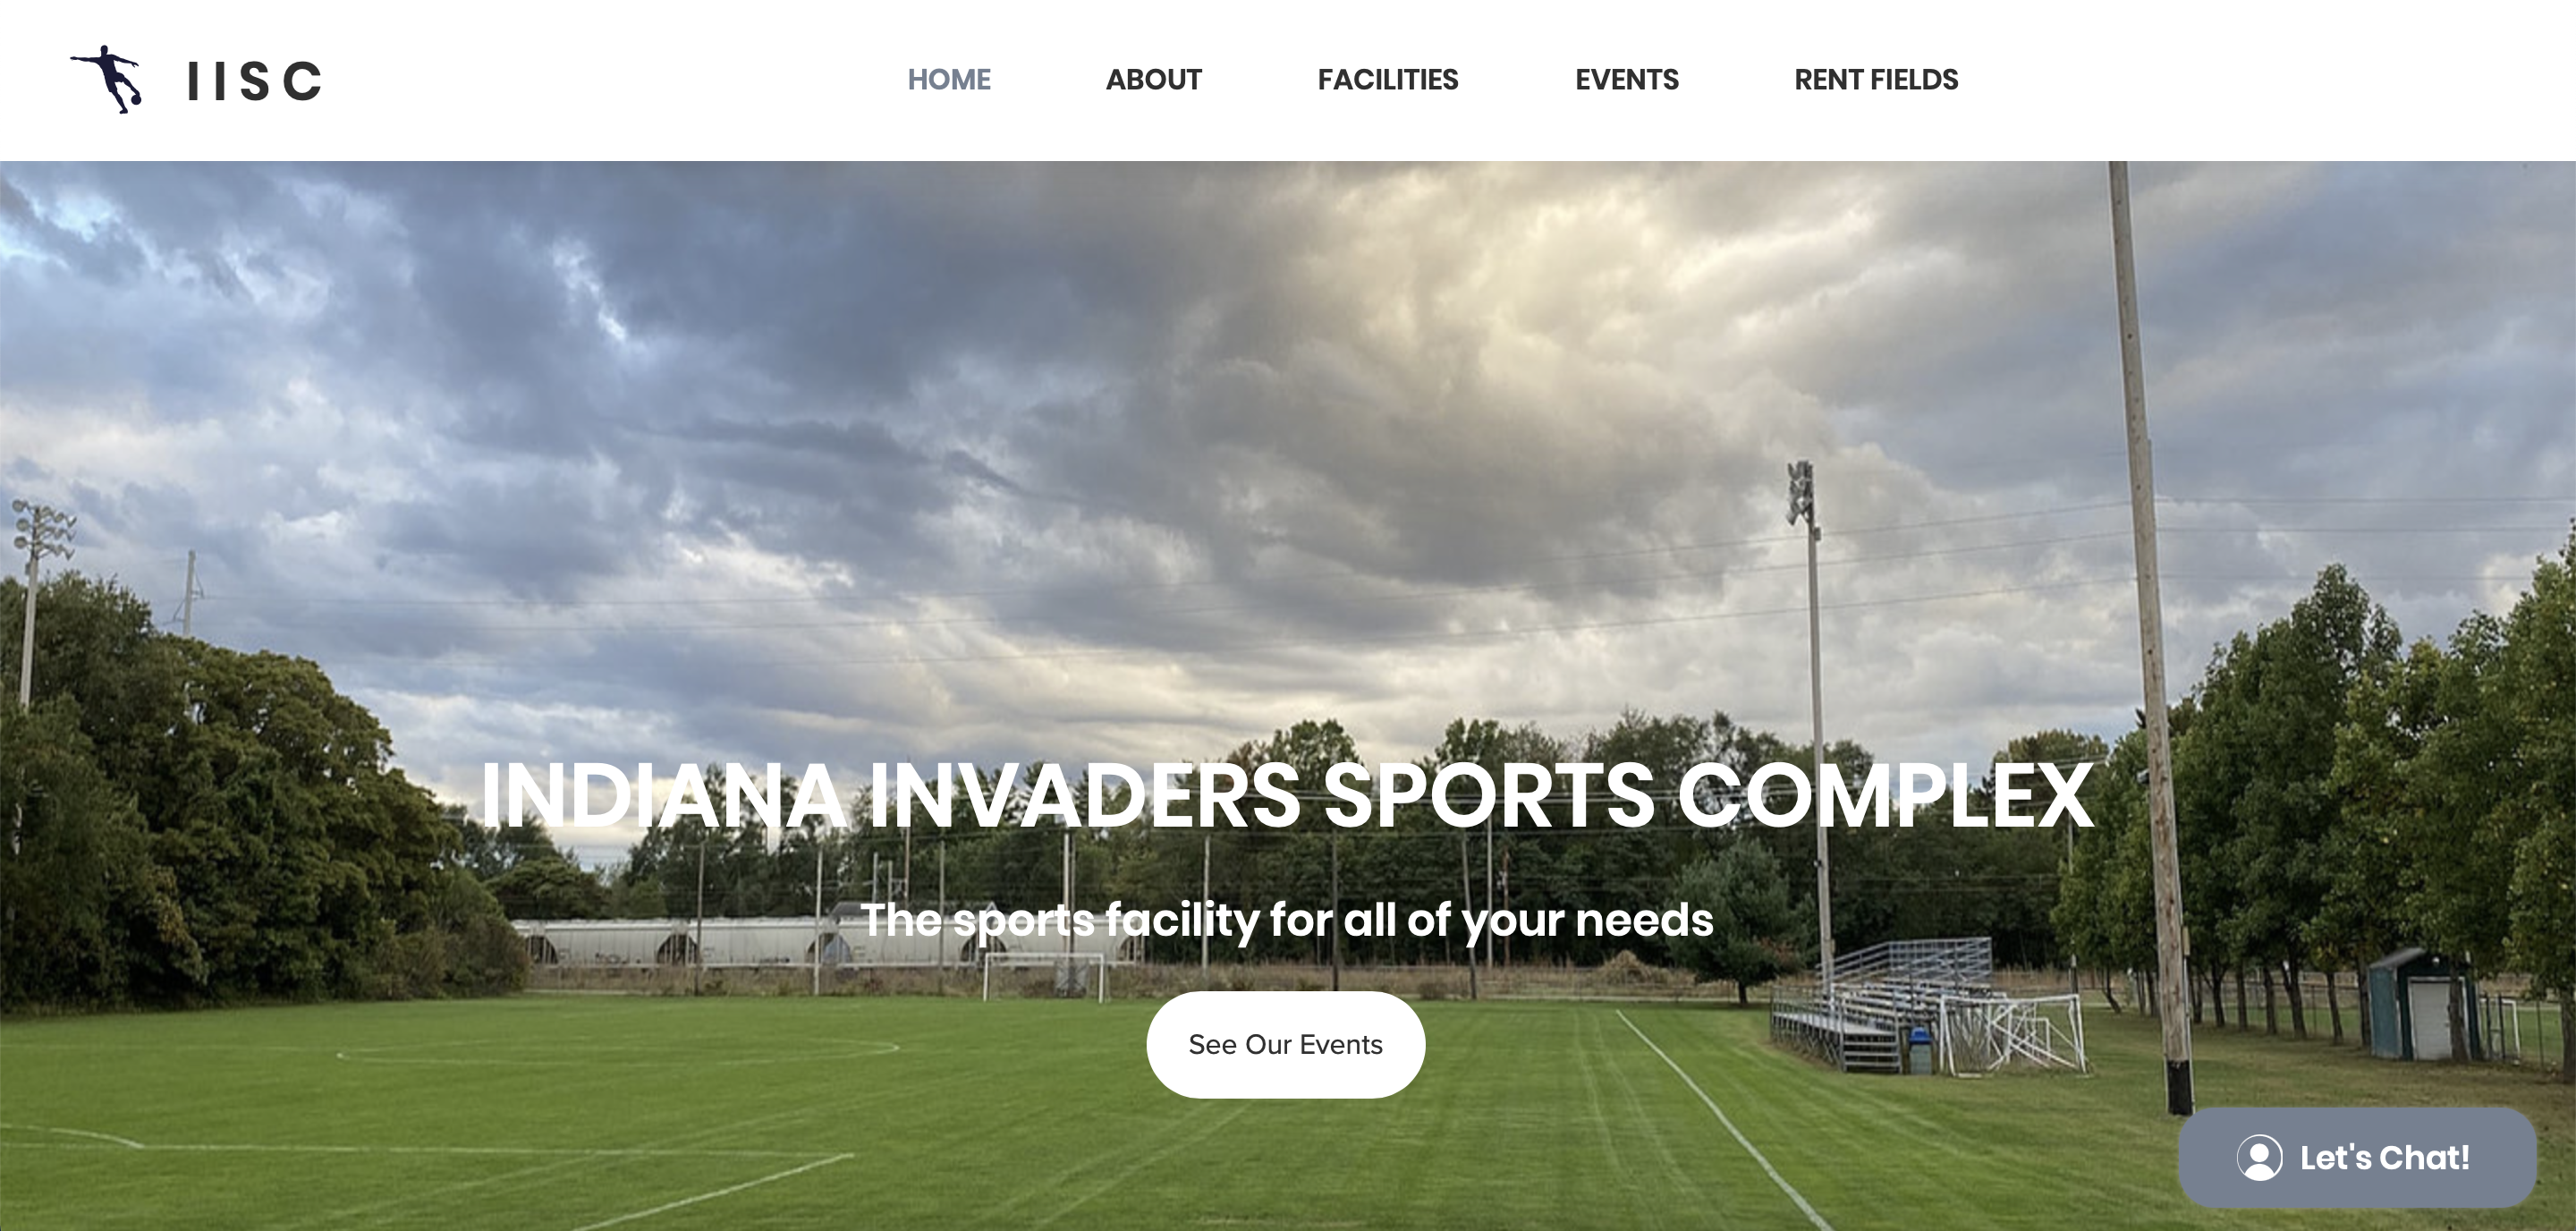 Indiana Invaders Sports Complex